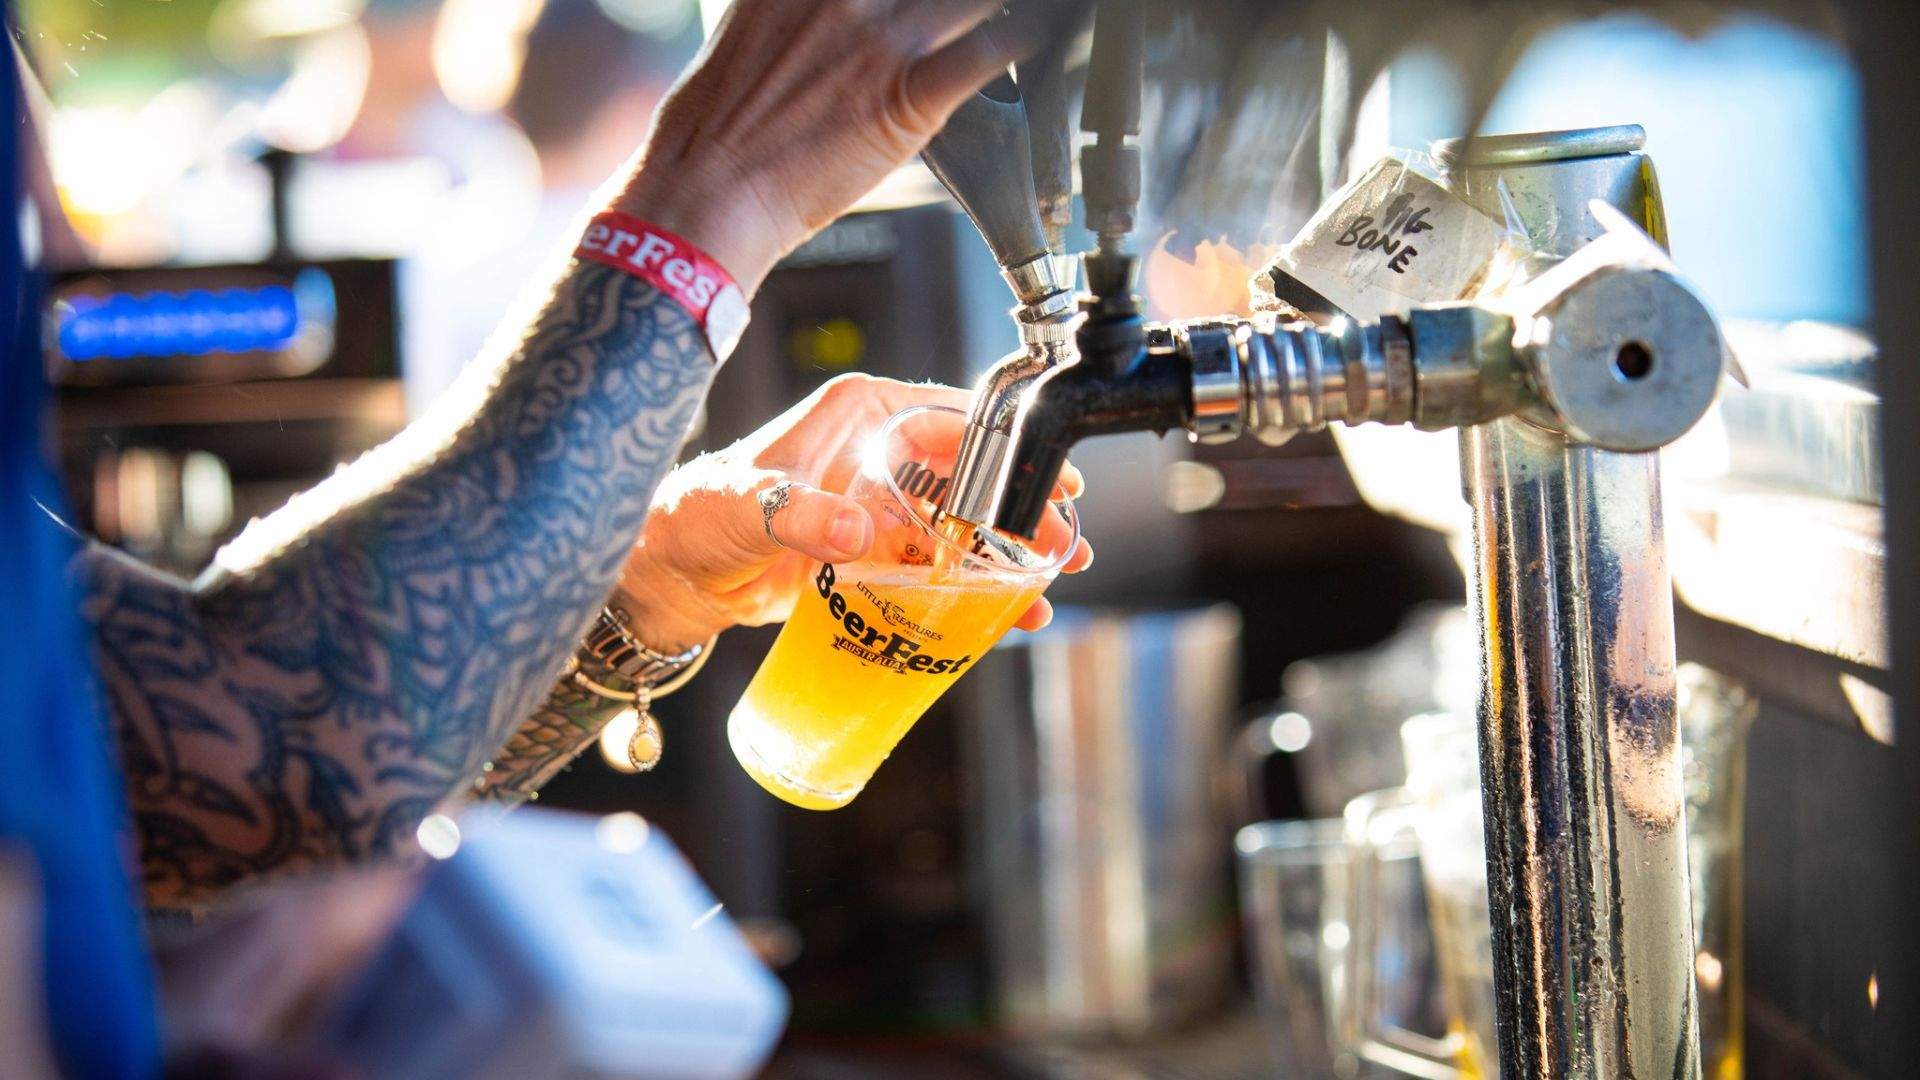 Coming Soon: BeerFest Is Sydney's New Drinks Festival That's Pouring Quality Tipples From Aussie Producers